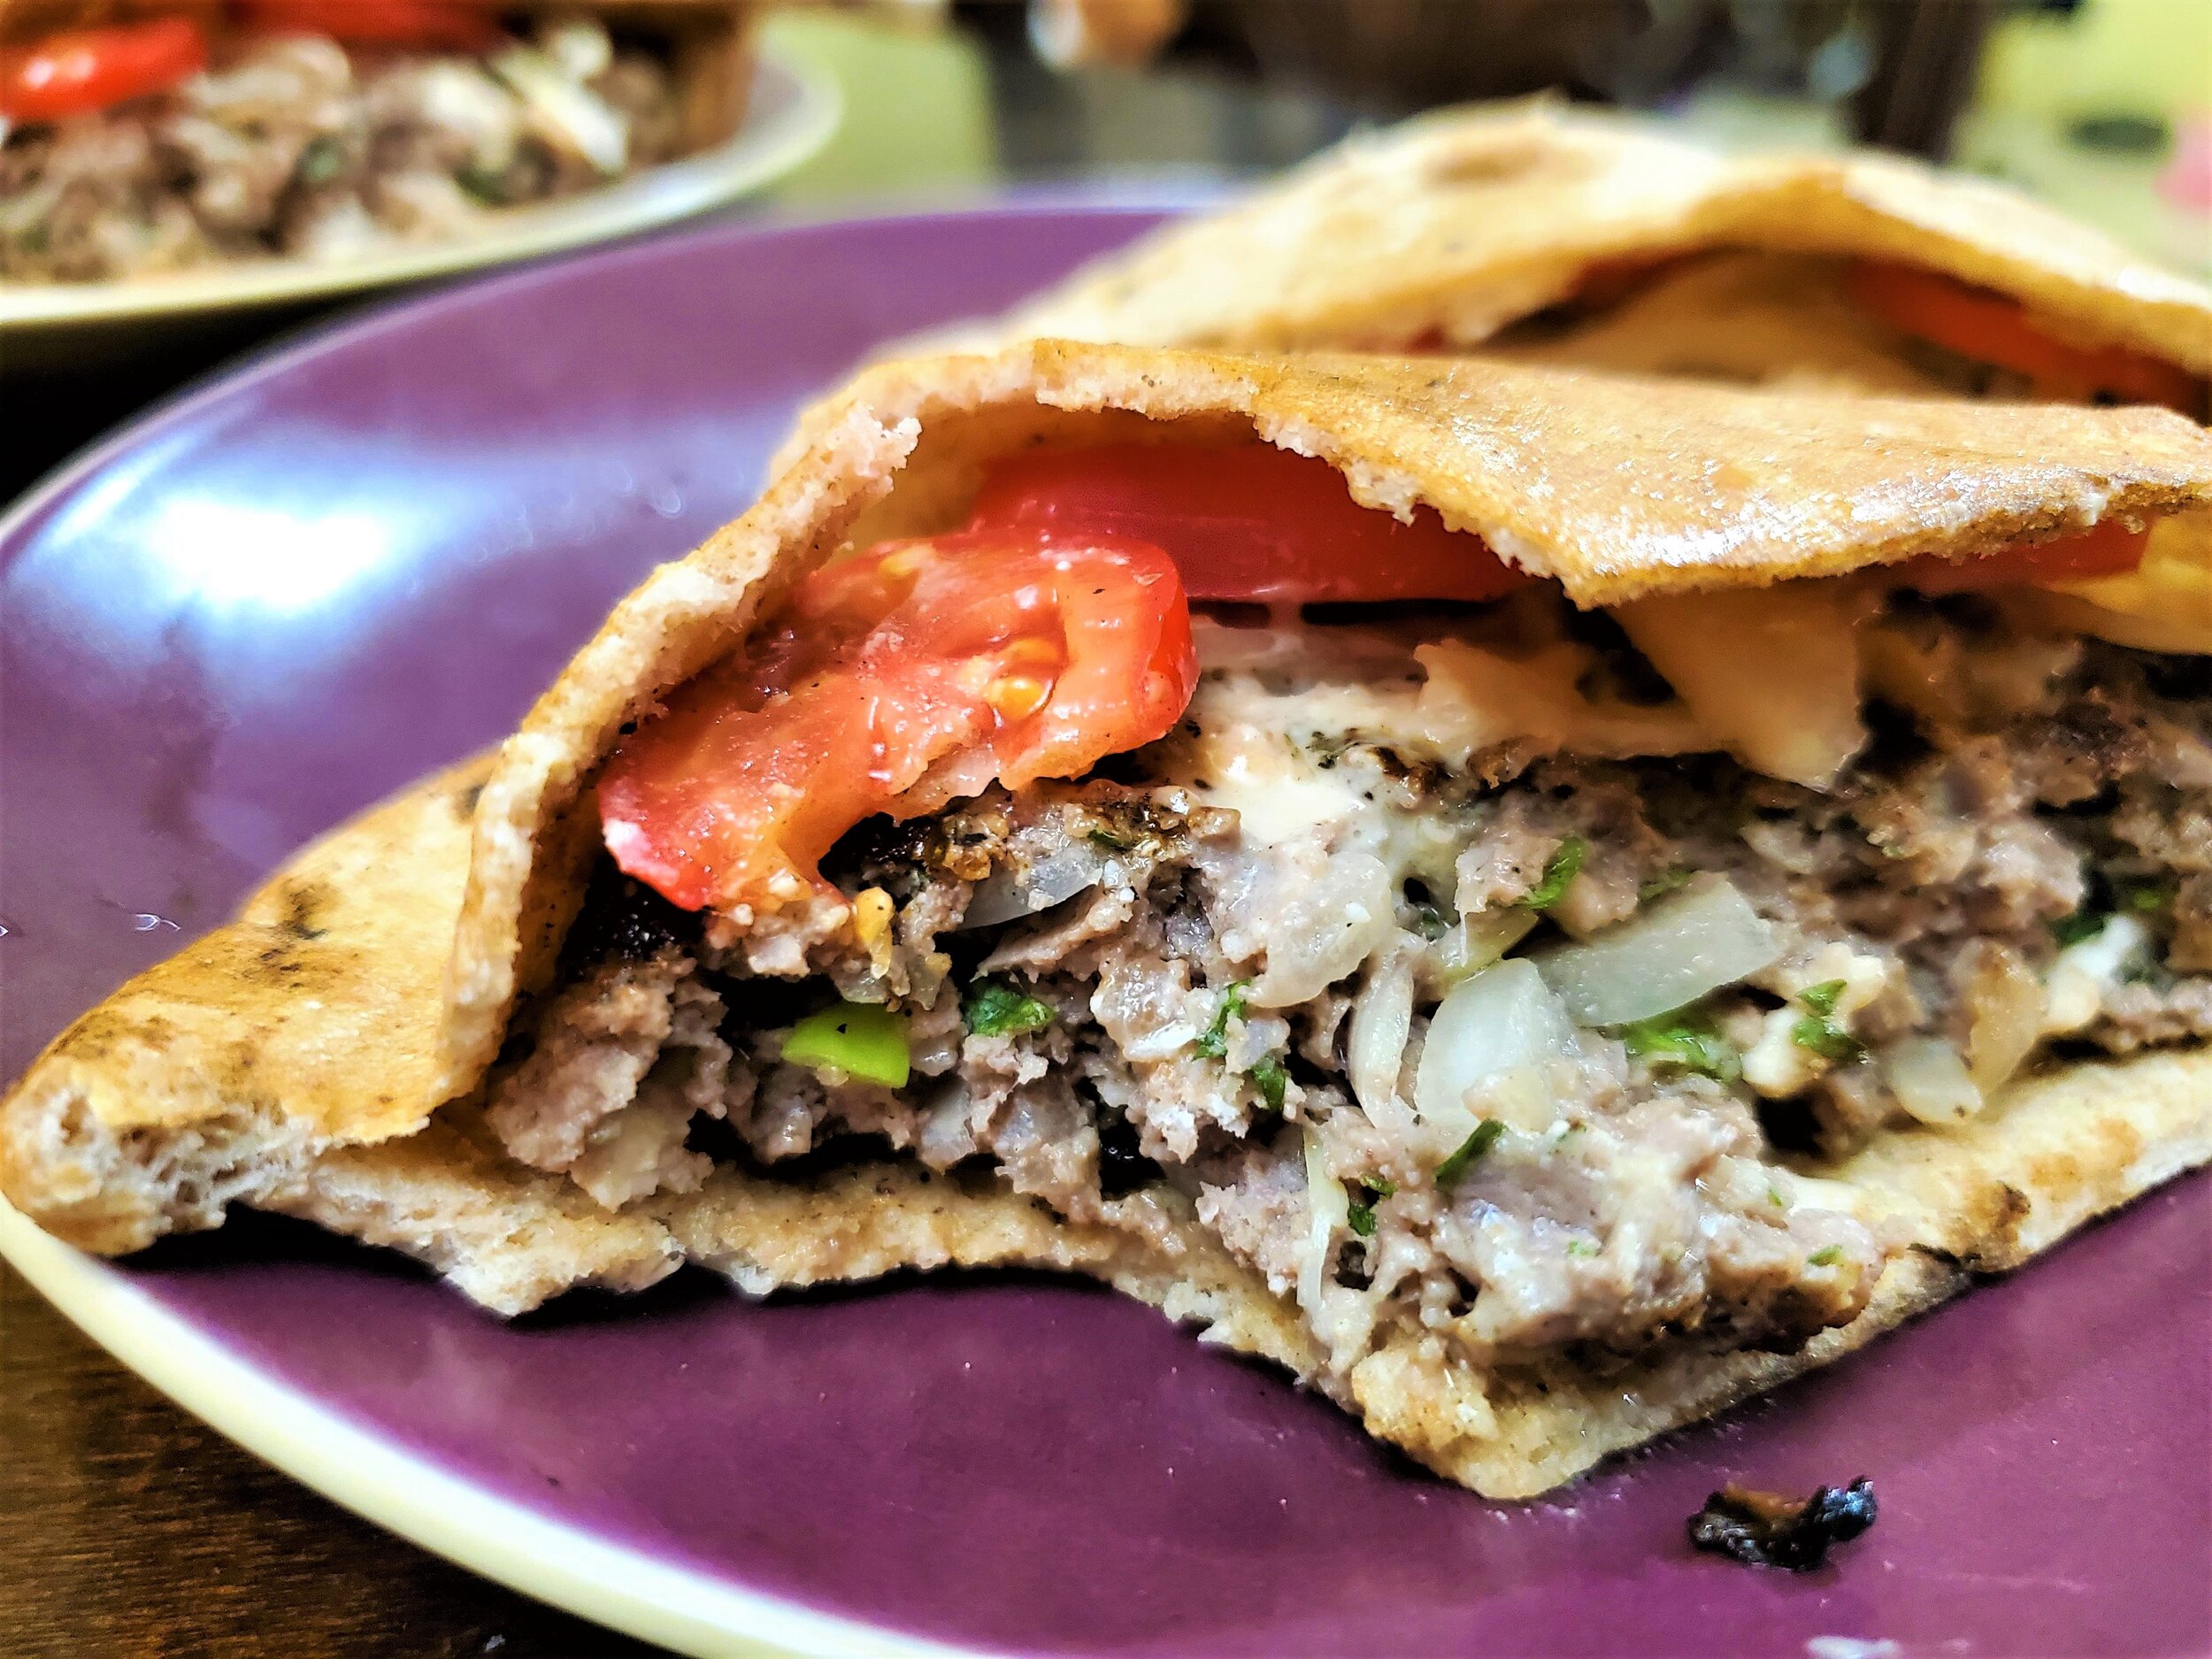 One bite of this pita pocket has so many delicious flavours going on...yum!